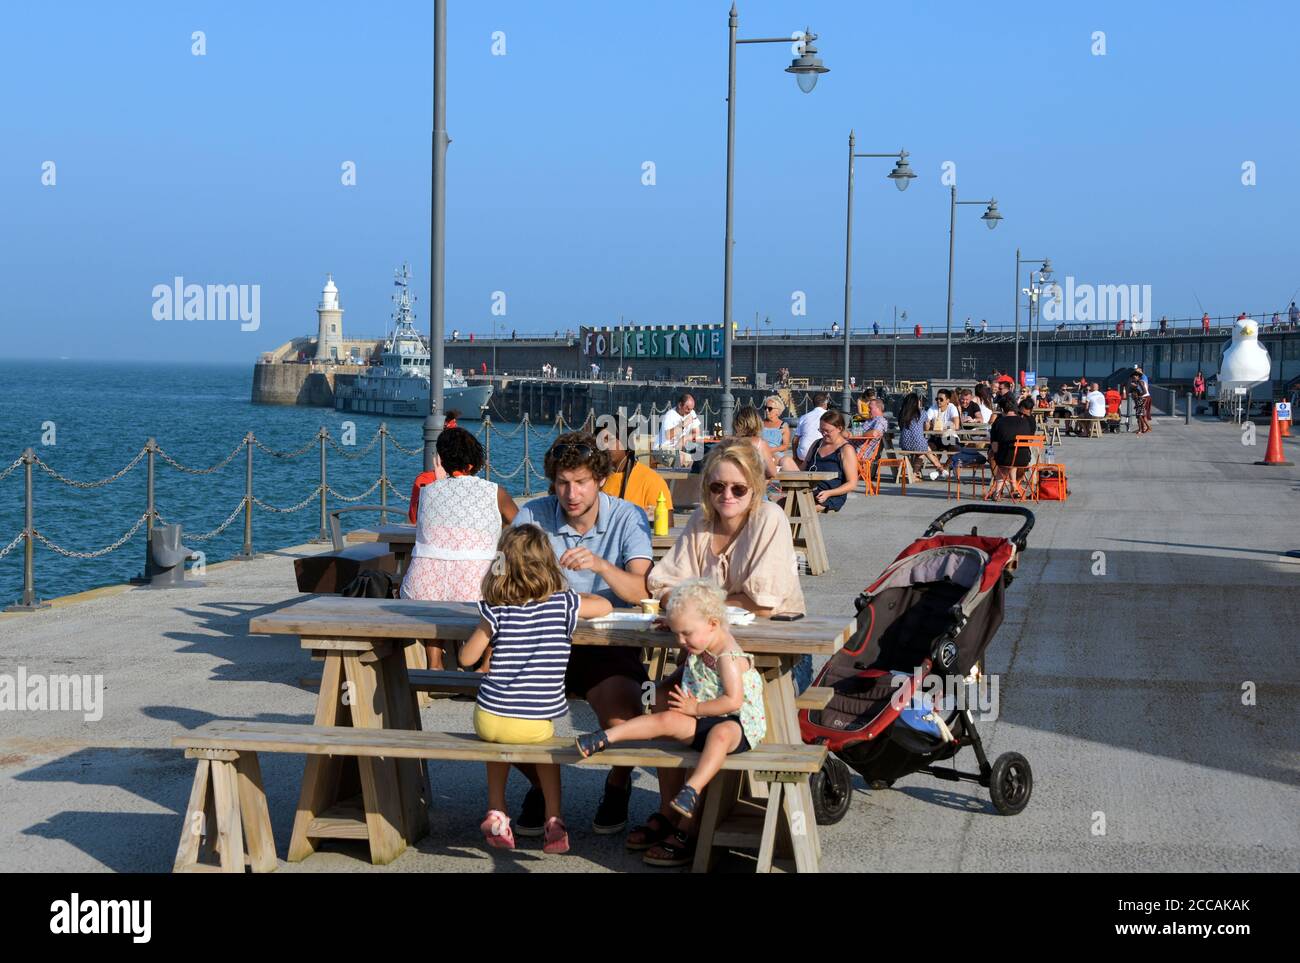 People relaxing late afternoon Folkestone Pier Kent England Stock Photo